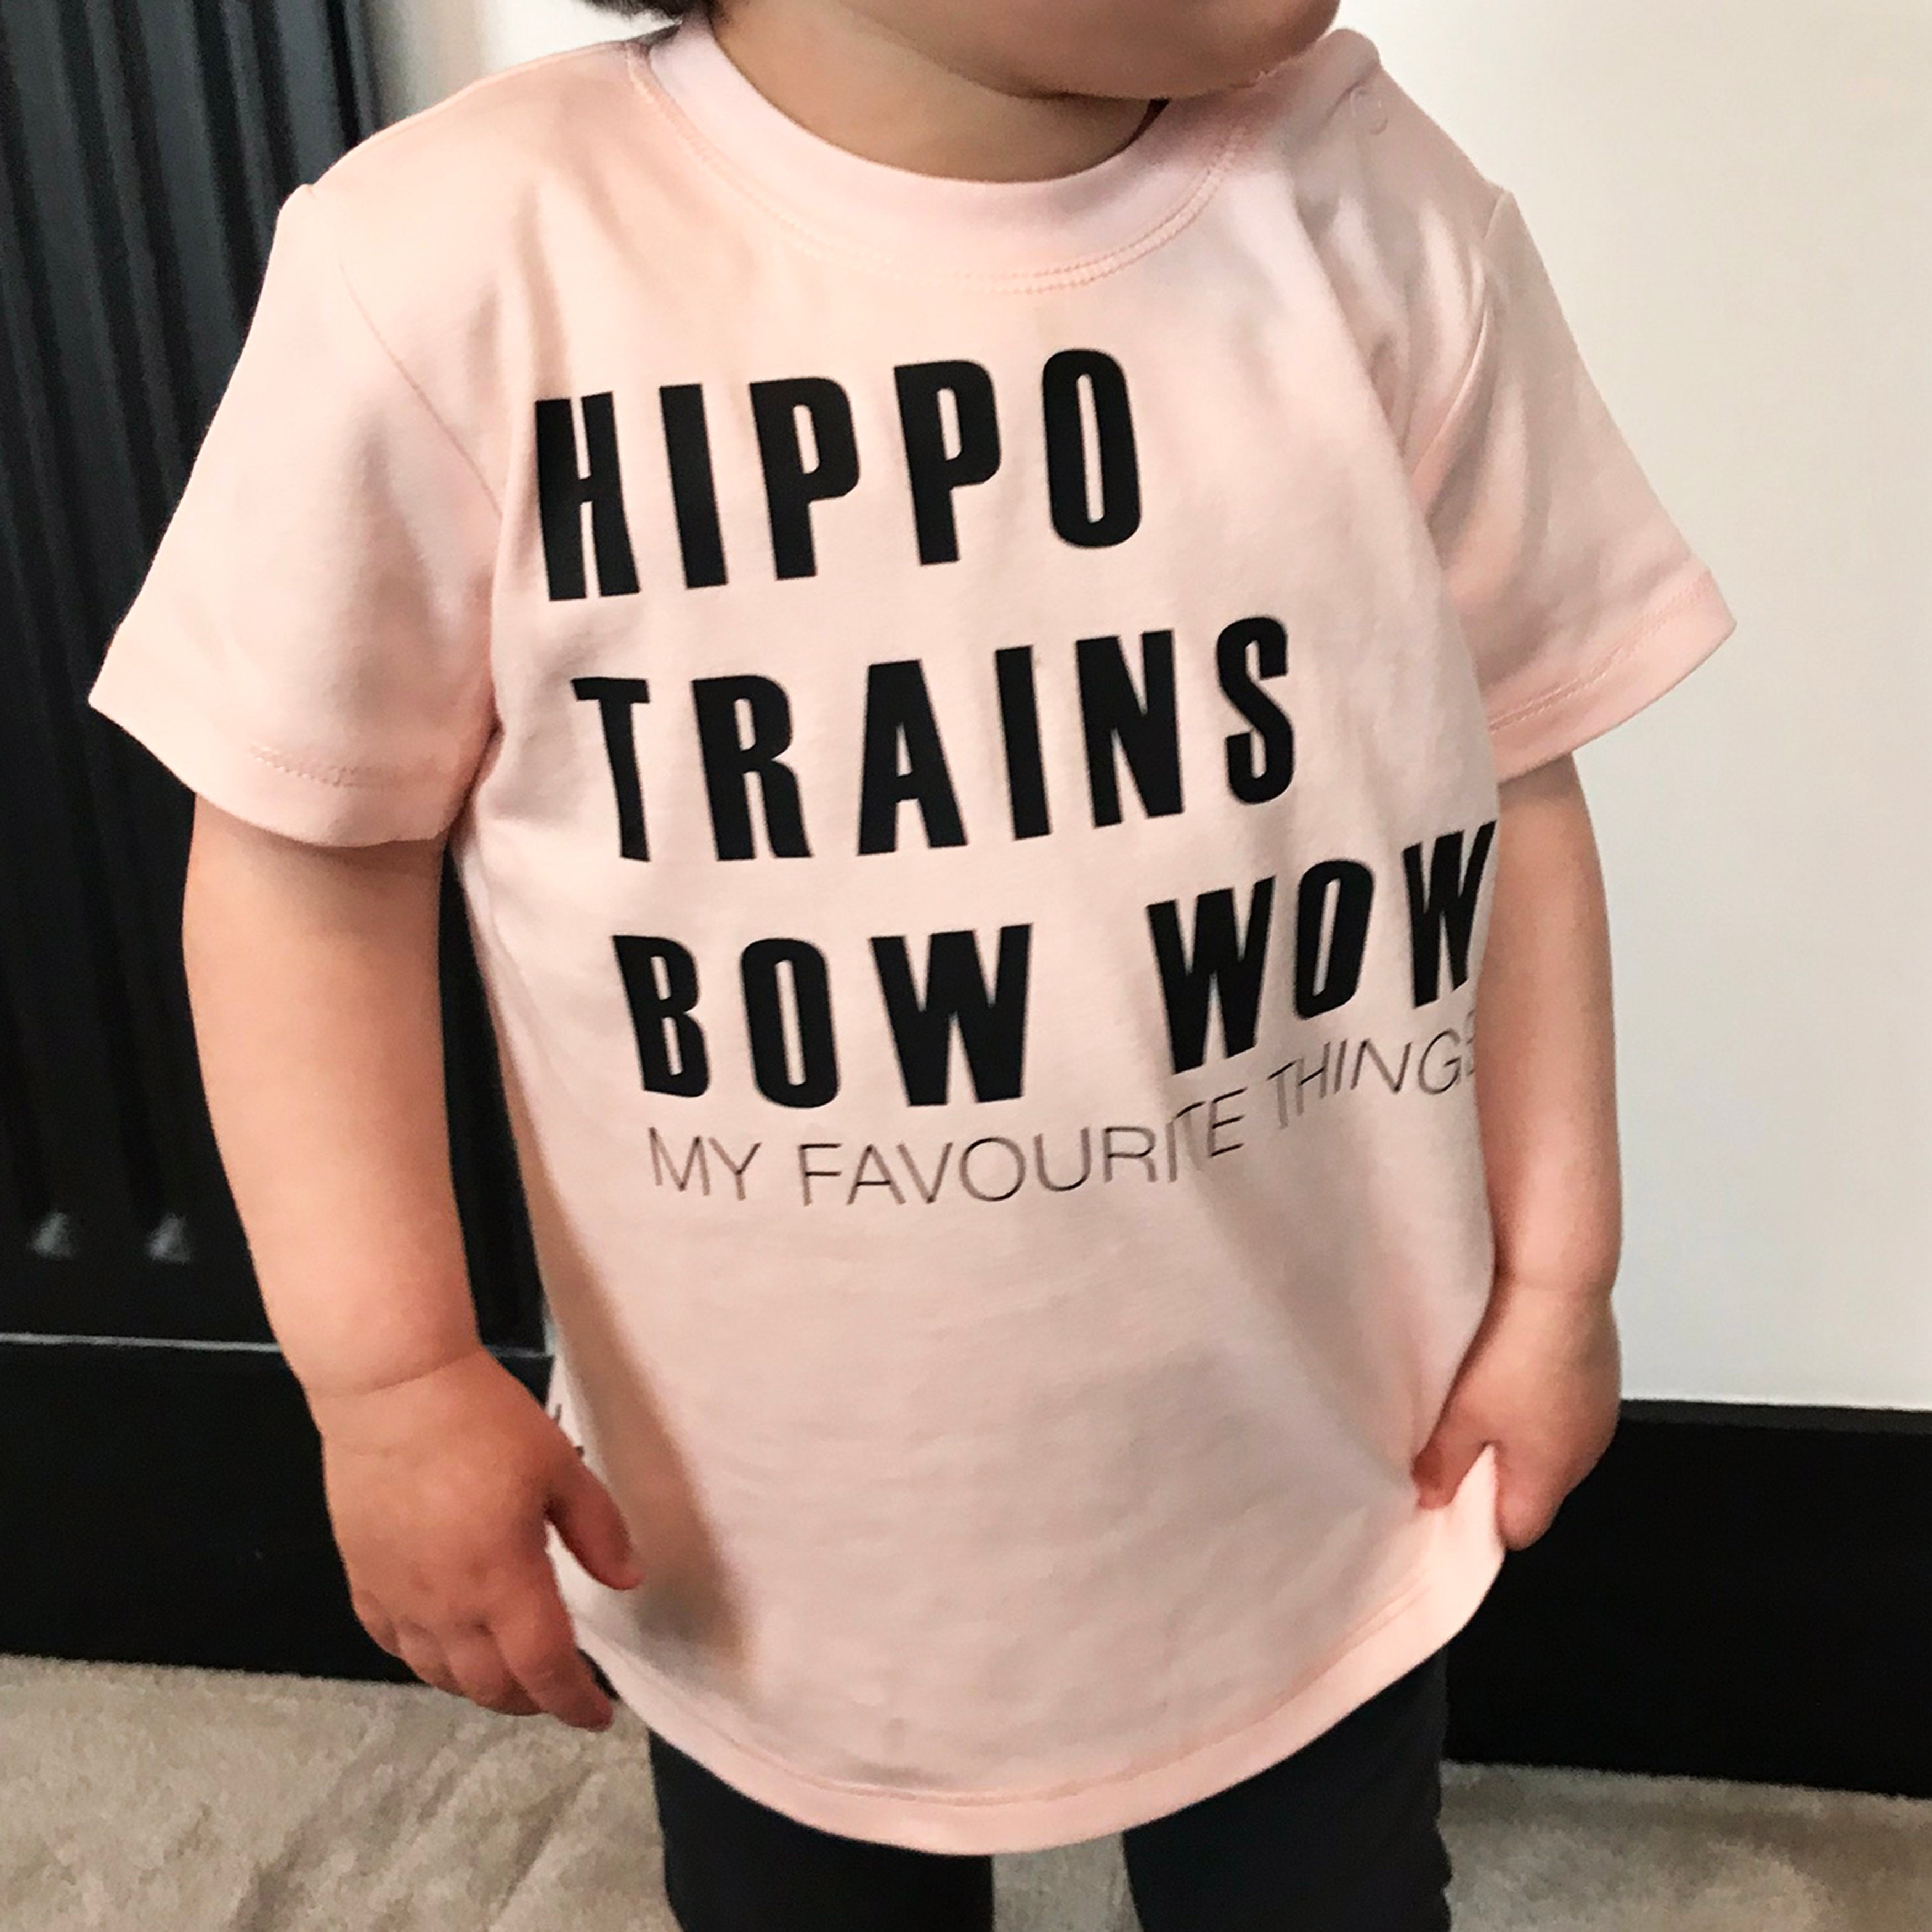 My Favourite Things Toddler Top